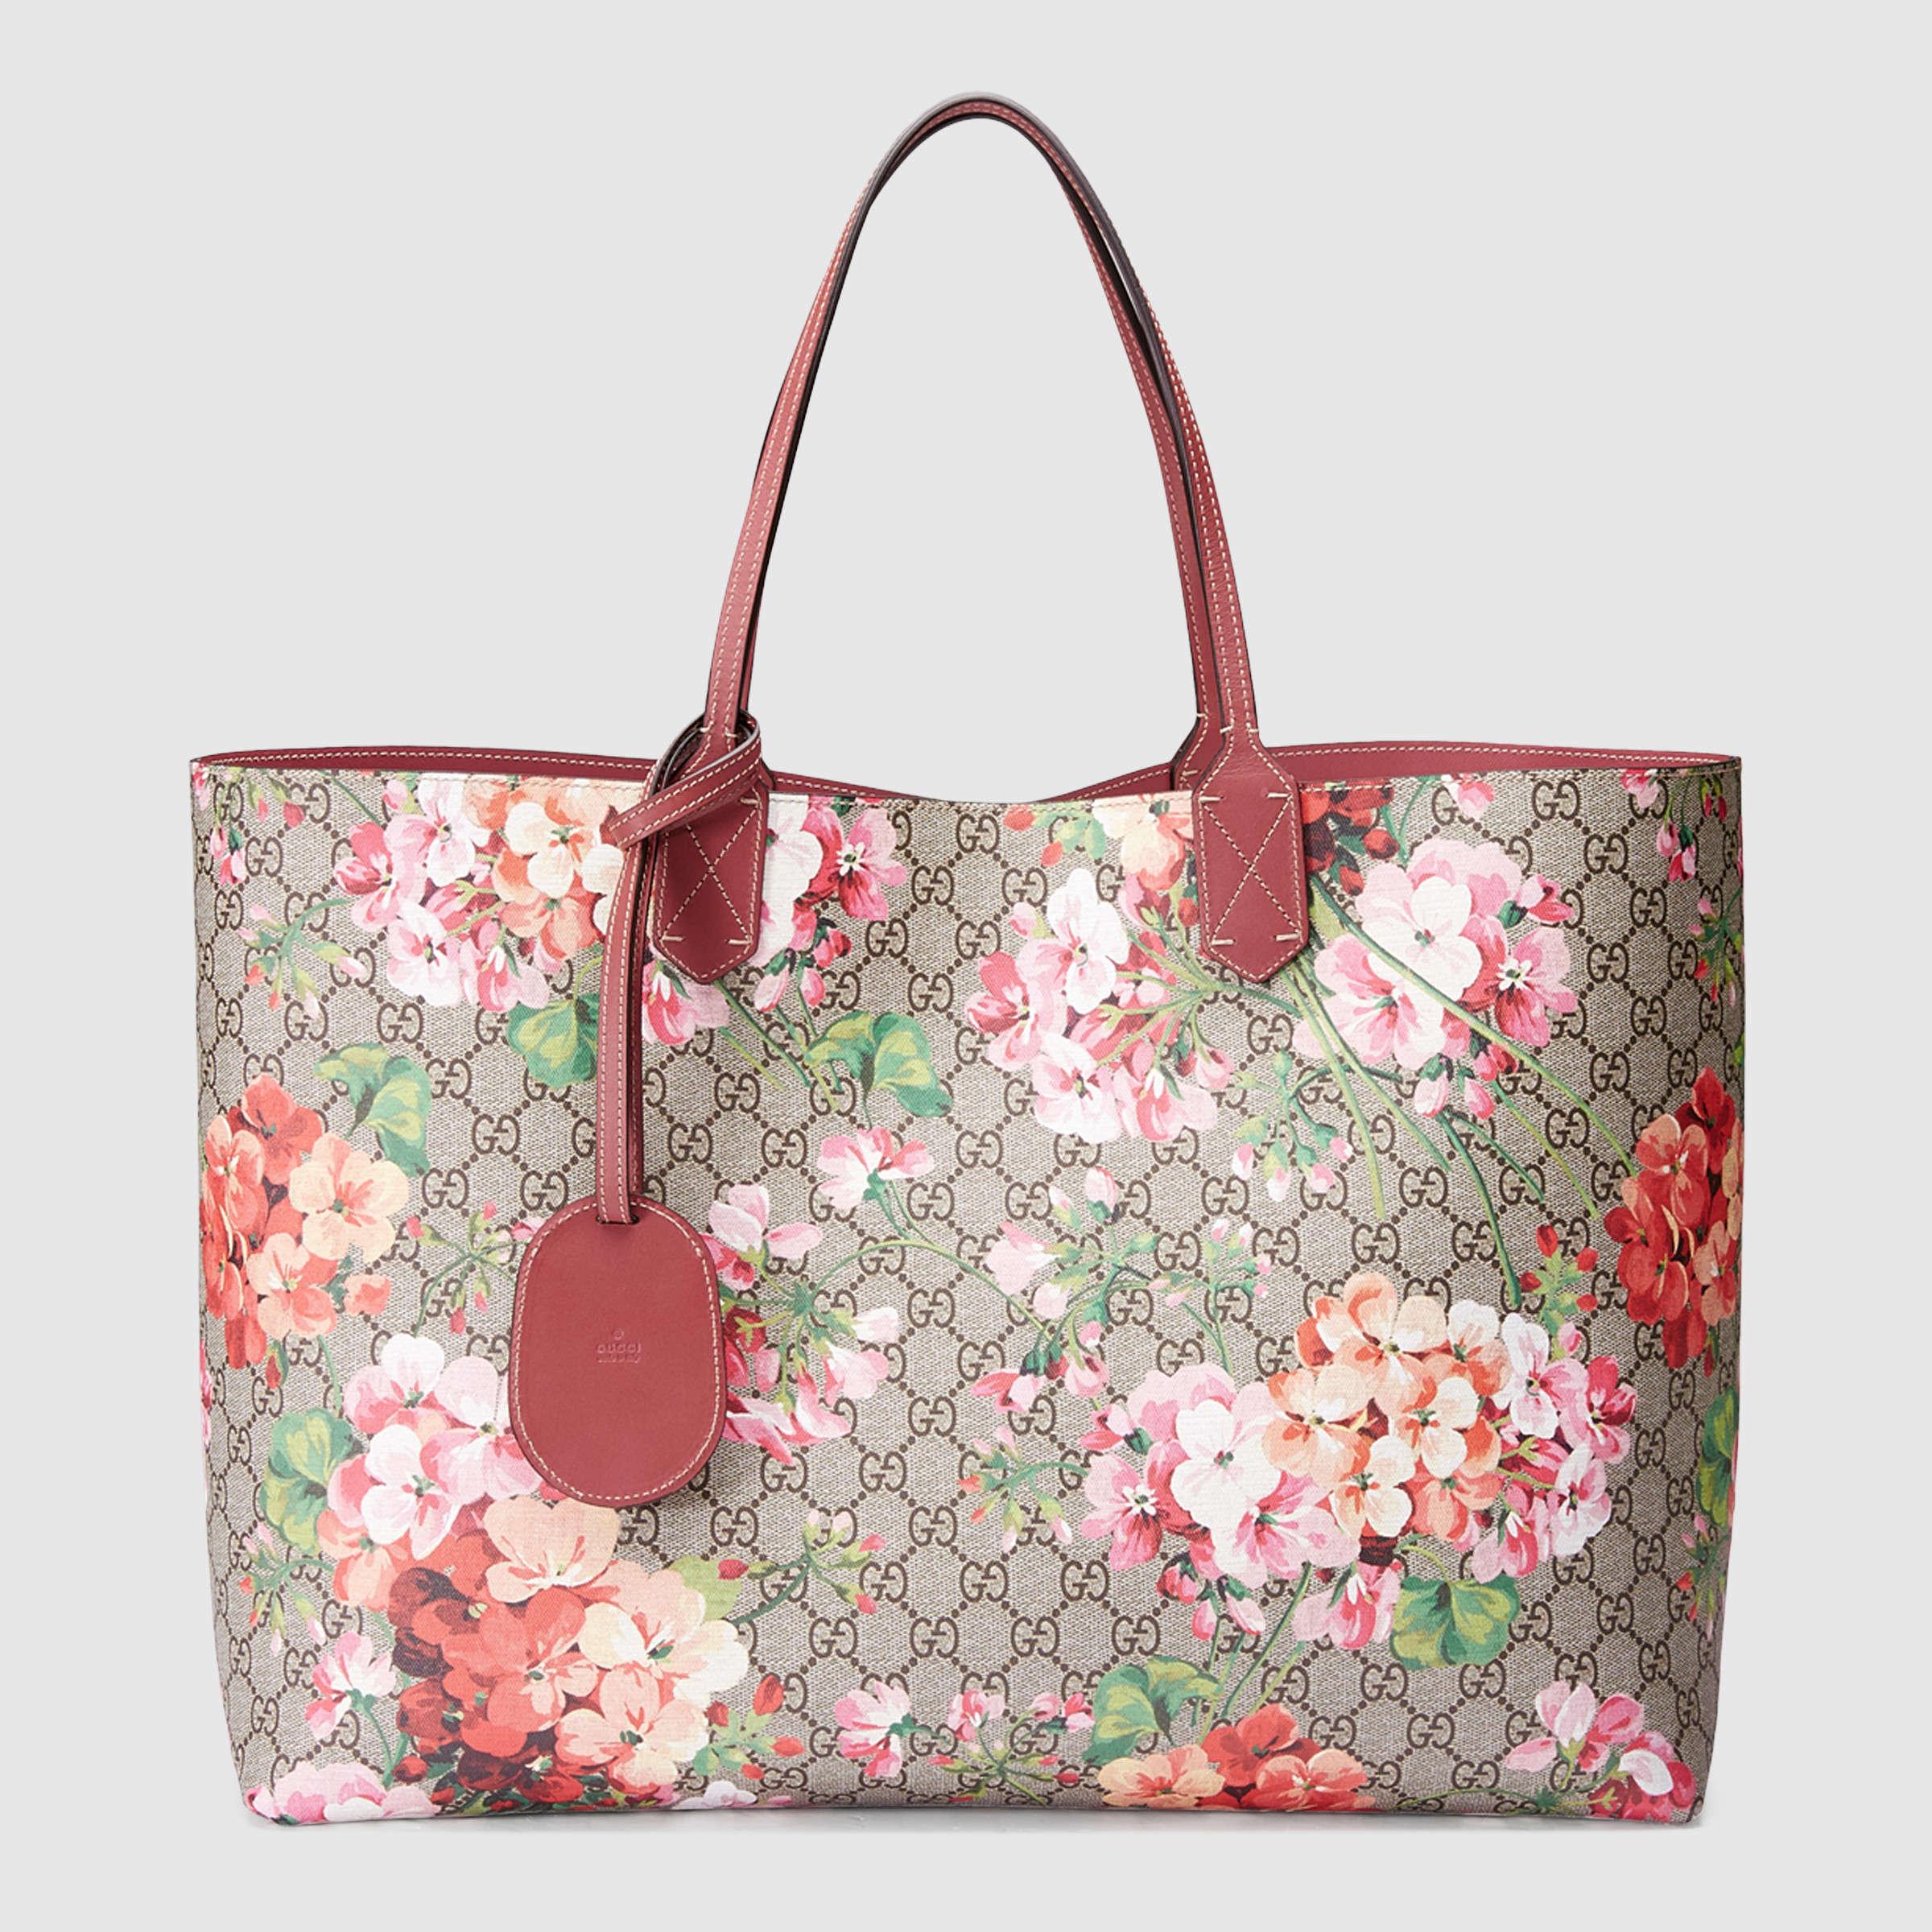 Gucci Reversible Gg Blooms Leather Tote in Pink - Lyst